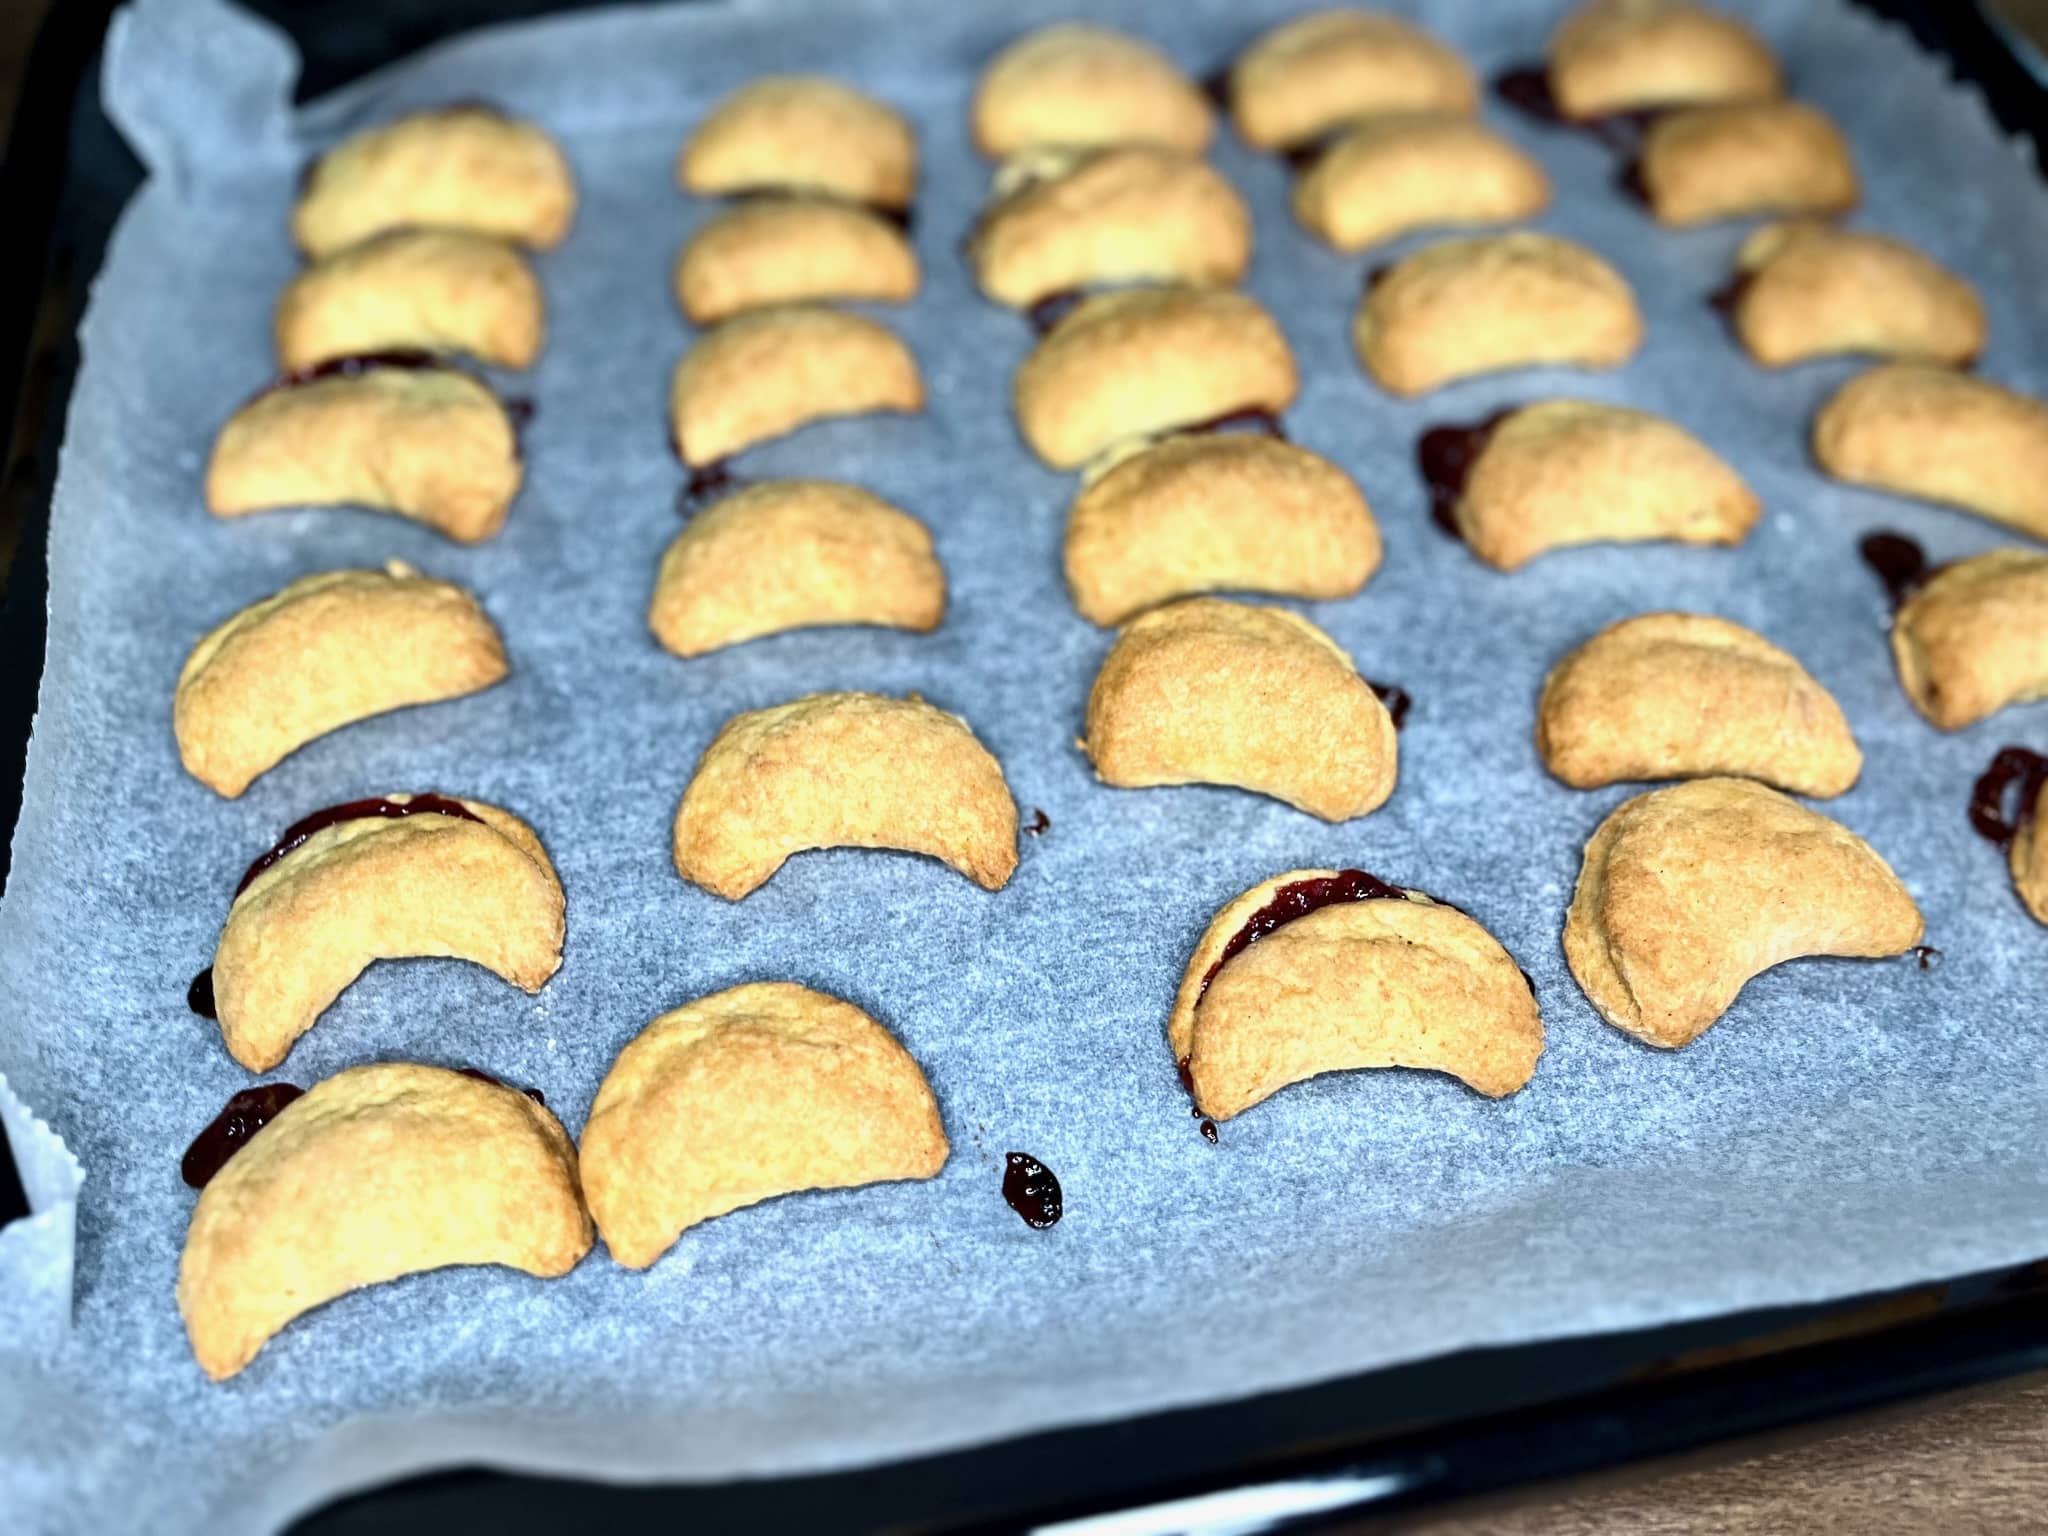 Crispy Cookies with Jam baked, resting on a tray